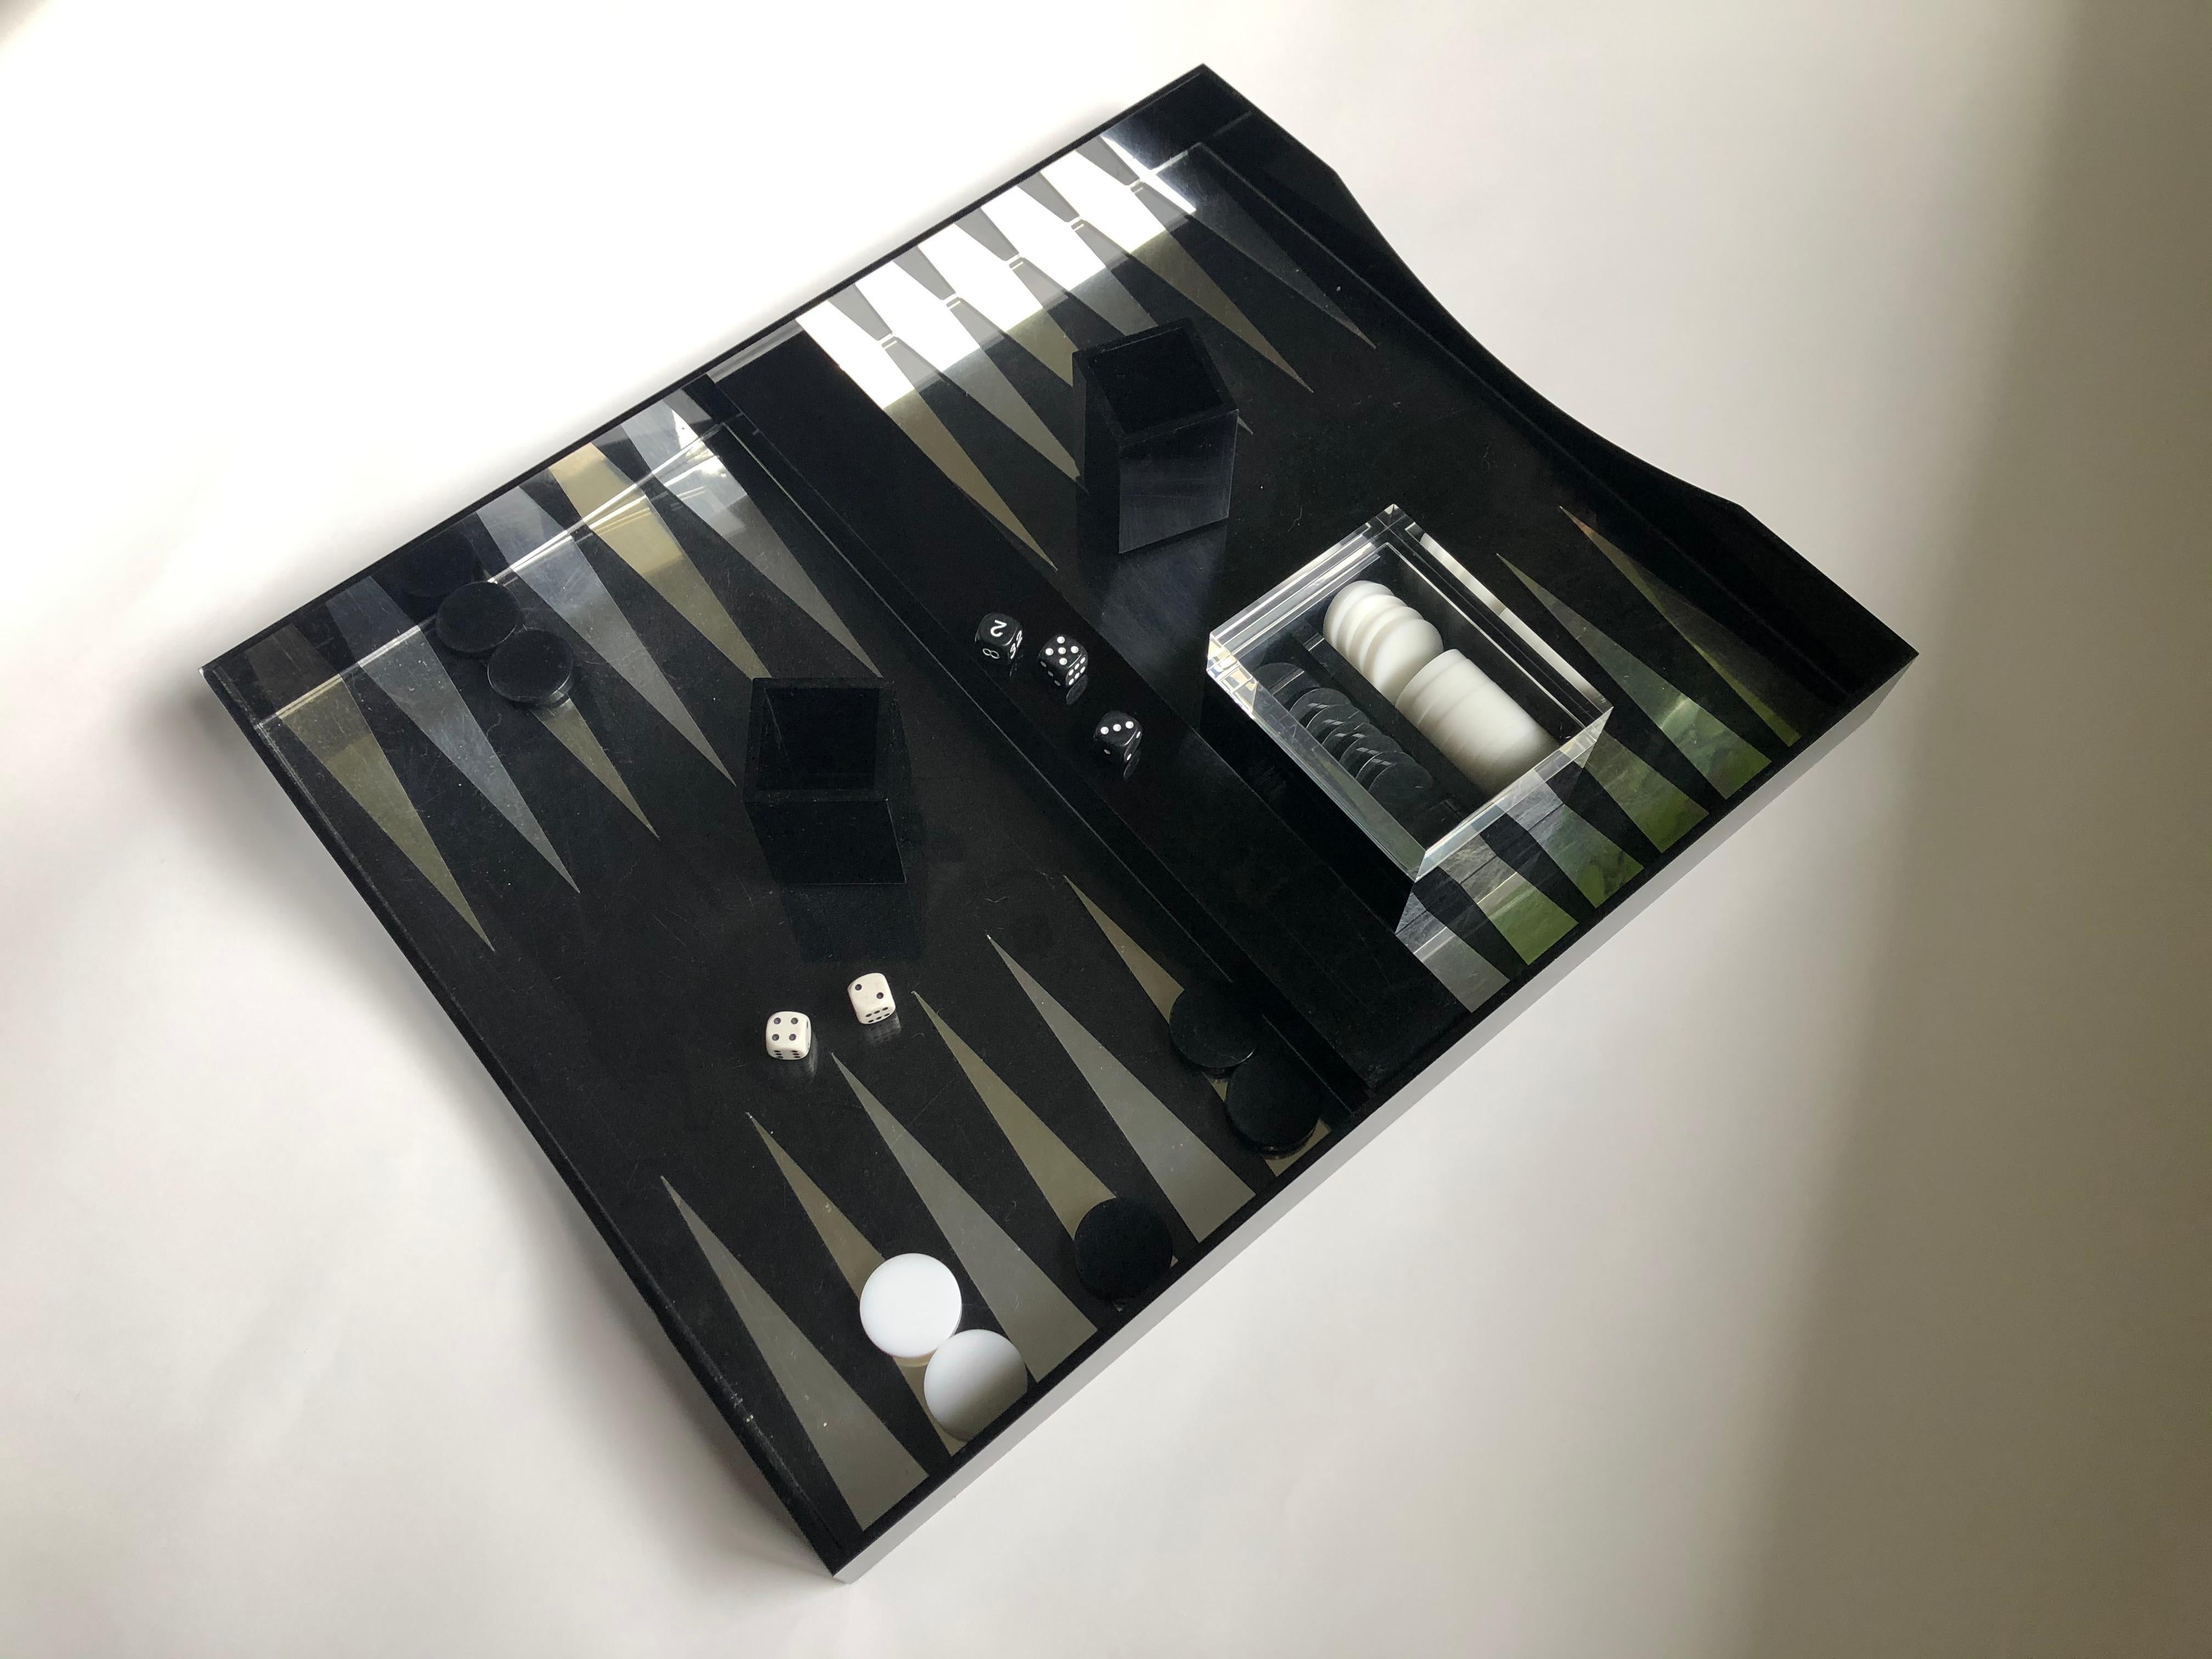 Complete vintage modern black Lucite backgammon set designed by Alessandro Albrizzi includes game board, a thick Lucite box for the Bakelite chips, two Lucite dice cups, and dice.